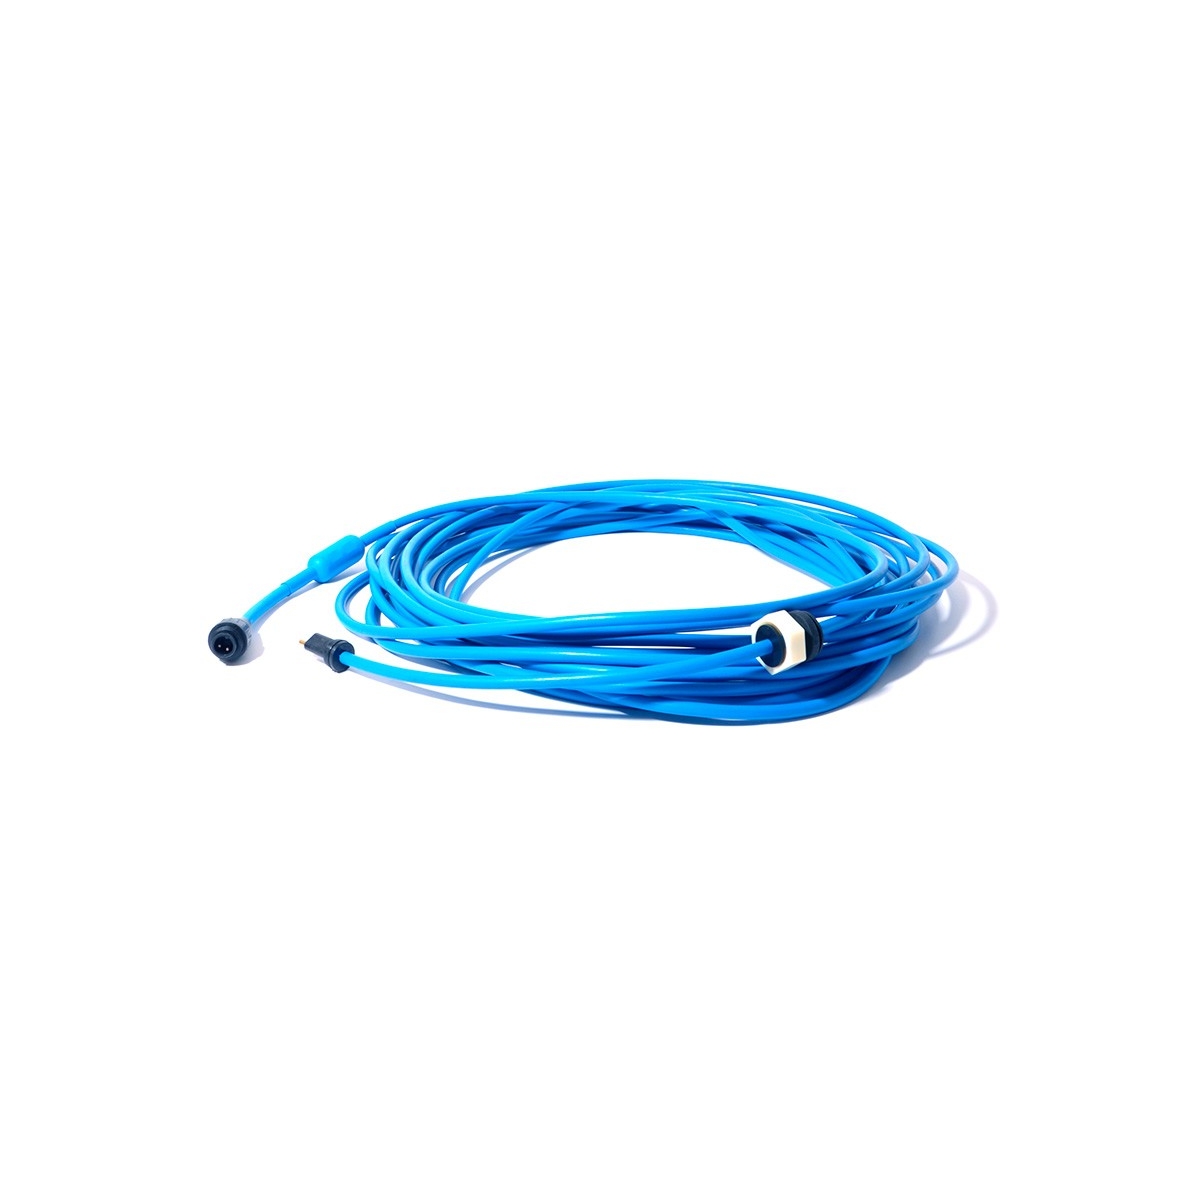 Floating cable 18 meters Dolphin 99958903-DIY